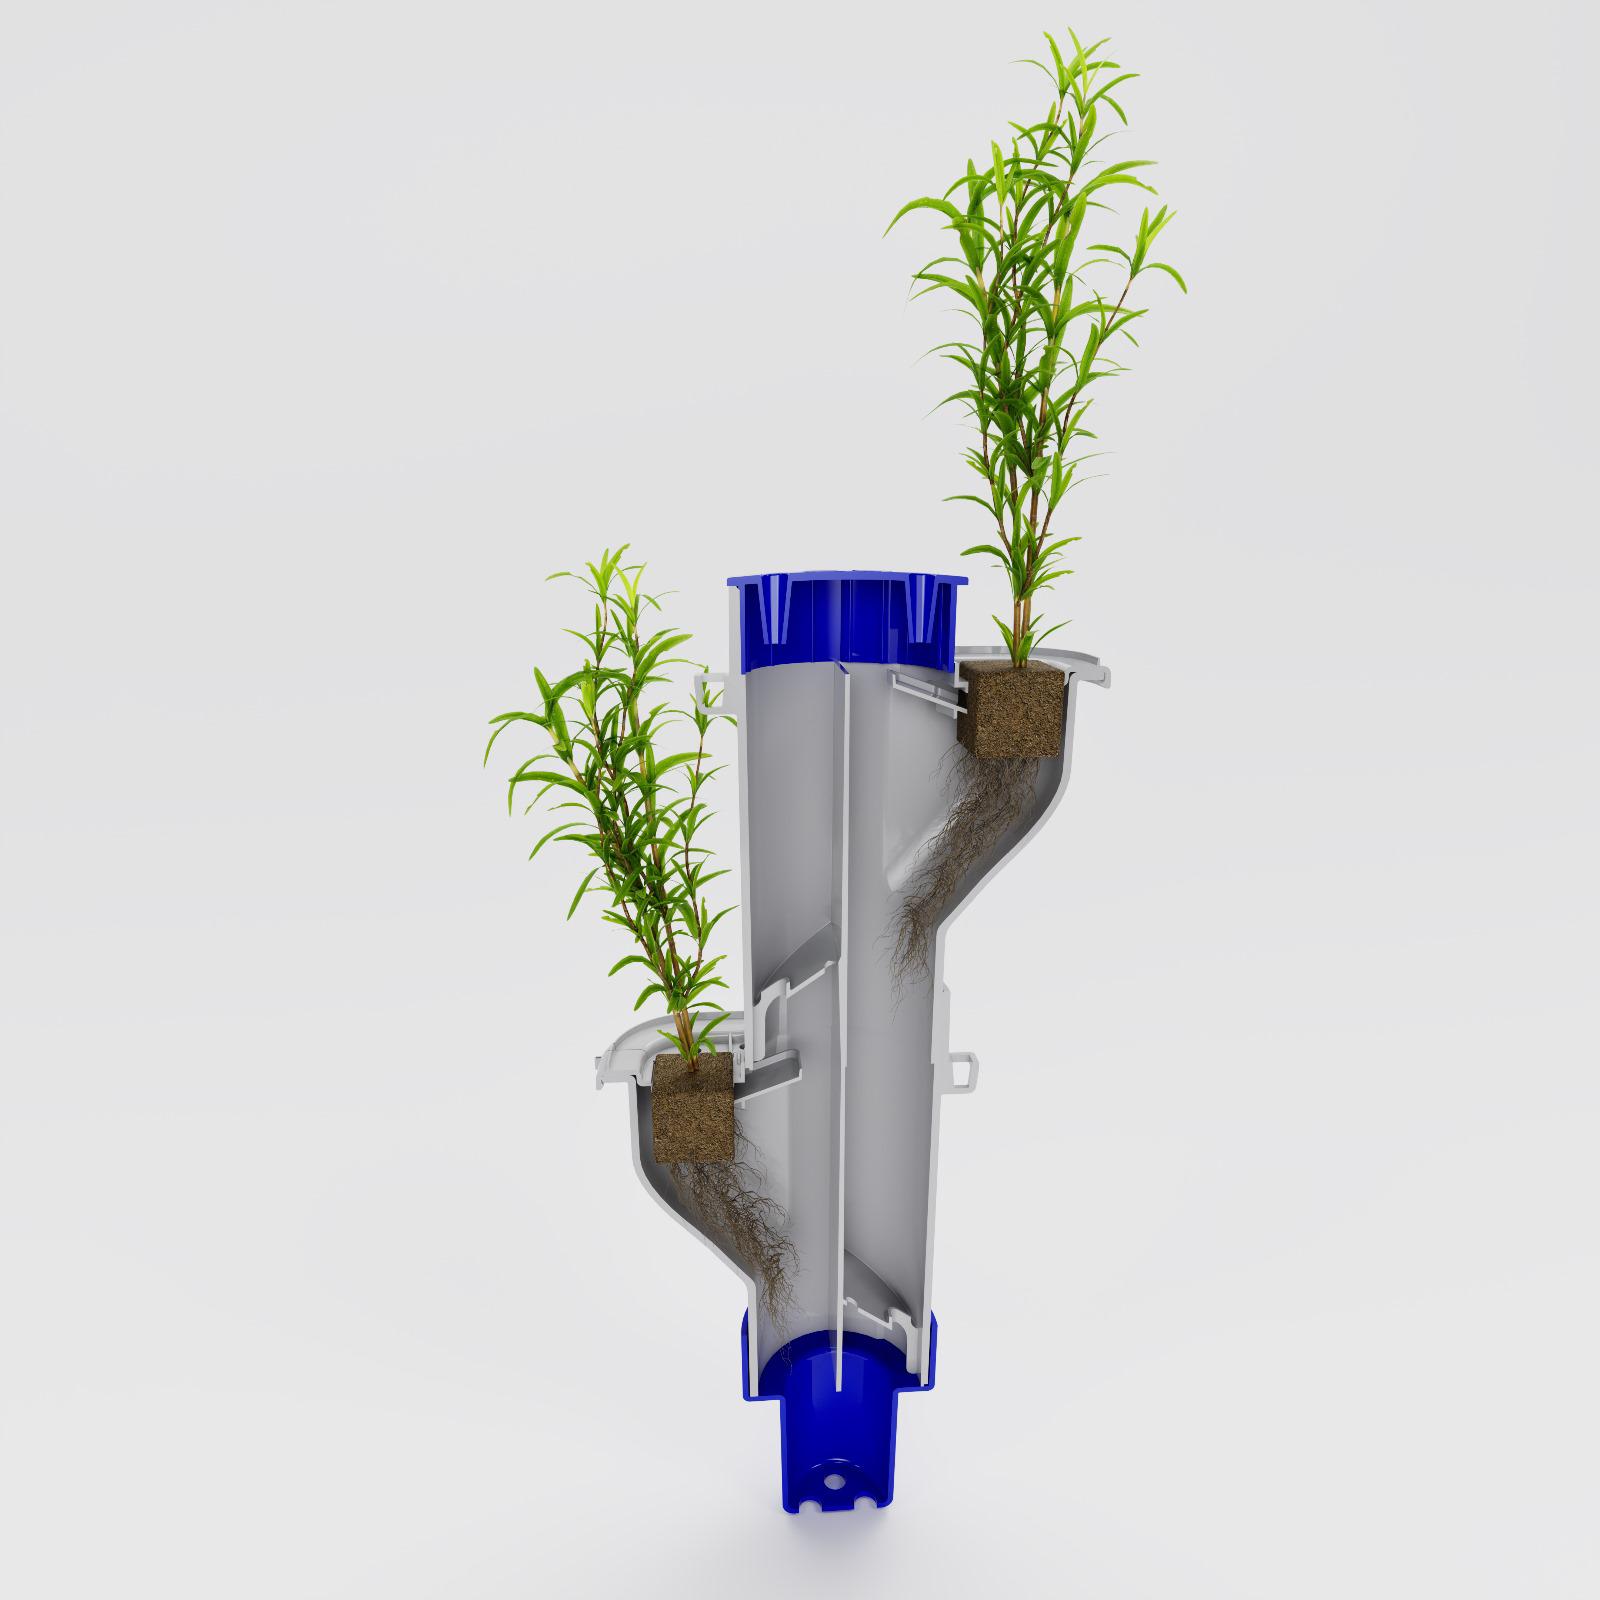 Growpipes vertical farming pipe cross-section view